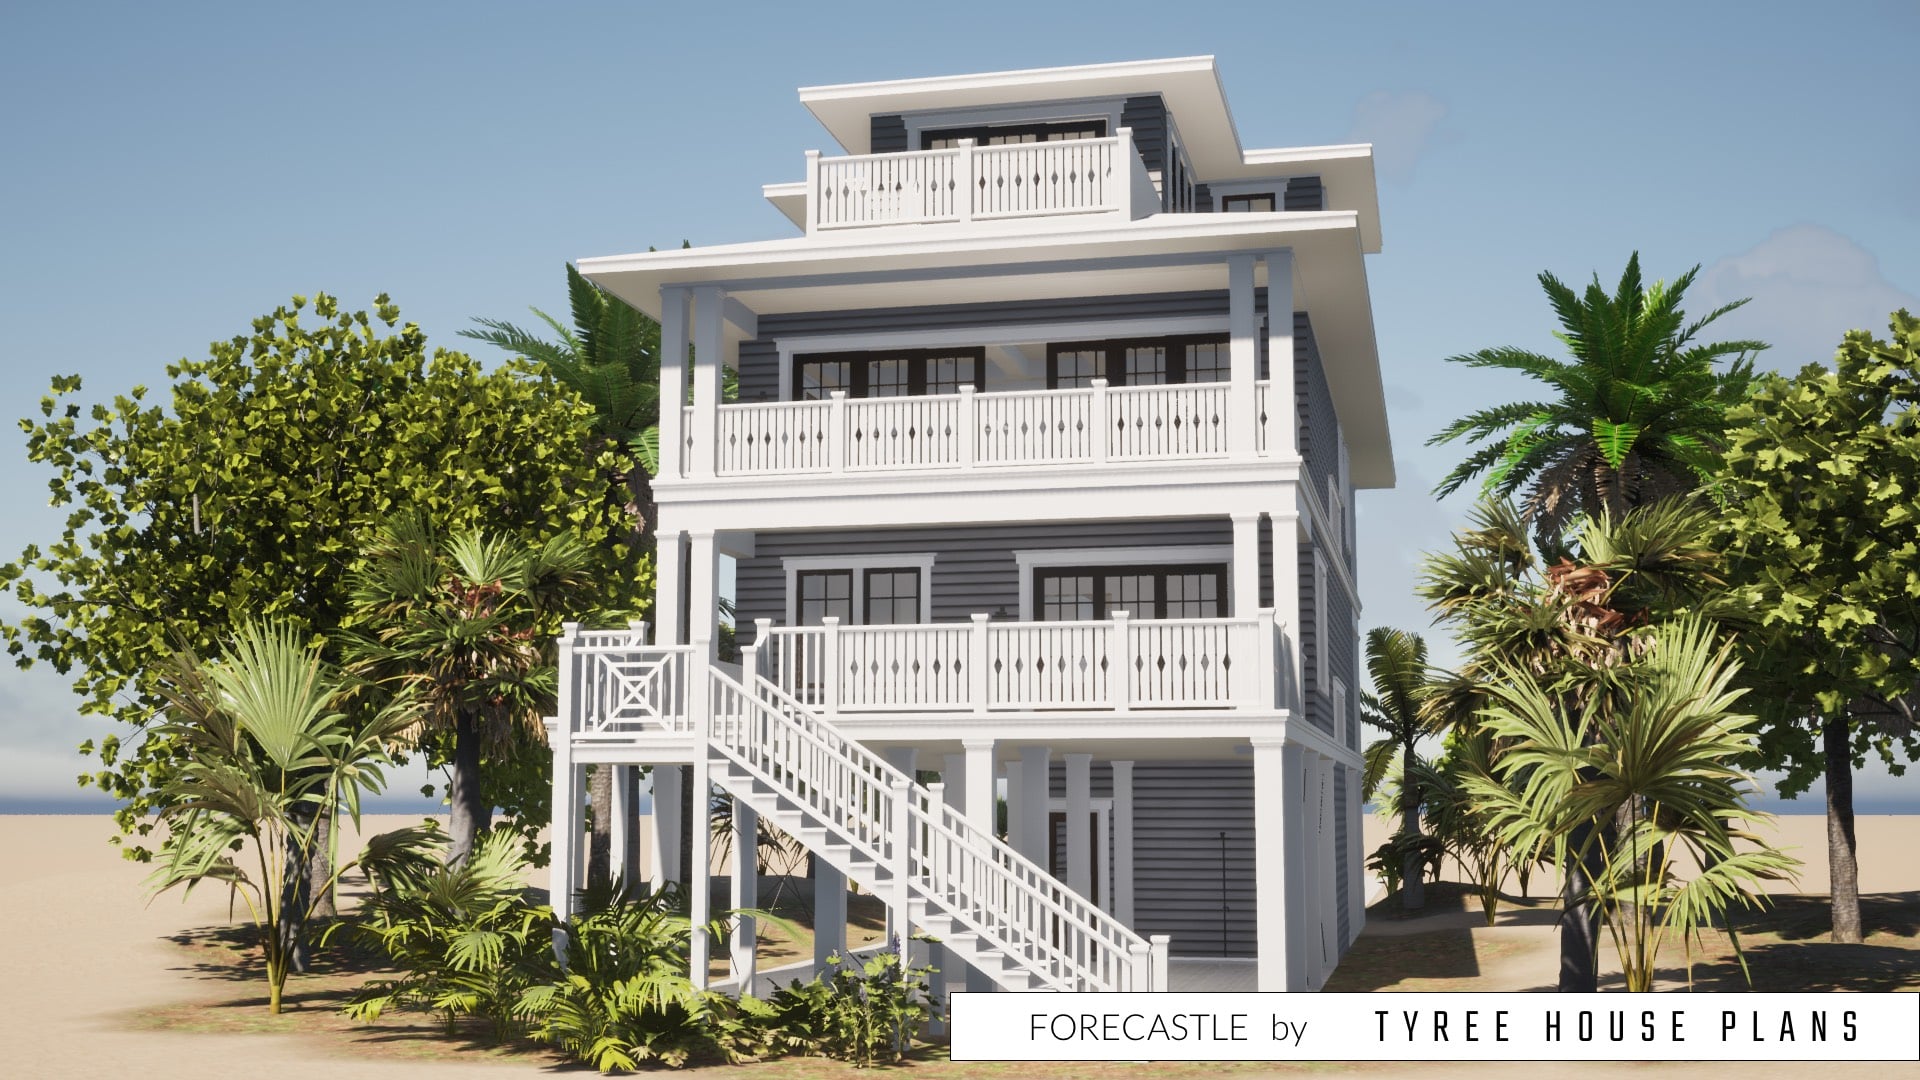 Back of the house with porches on every level. Forecastle by Tyree House Plans.